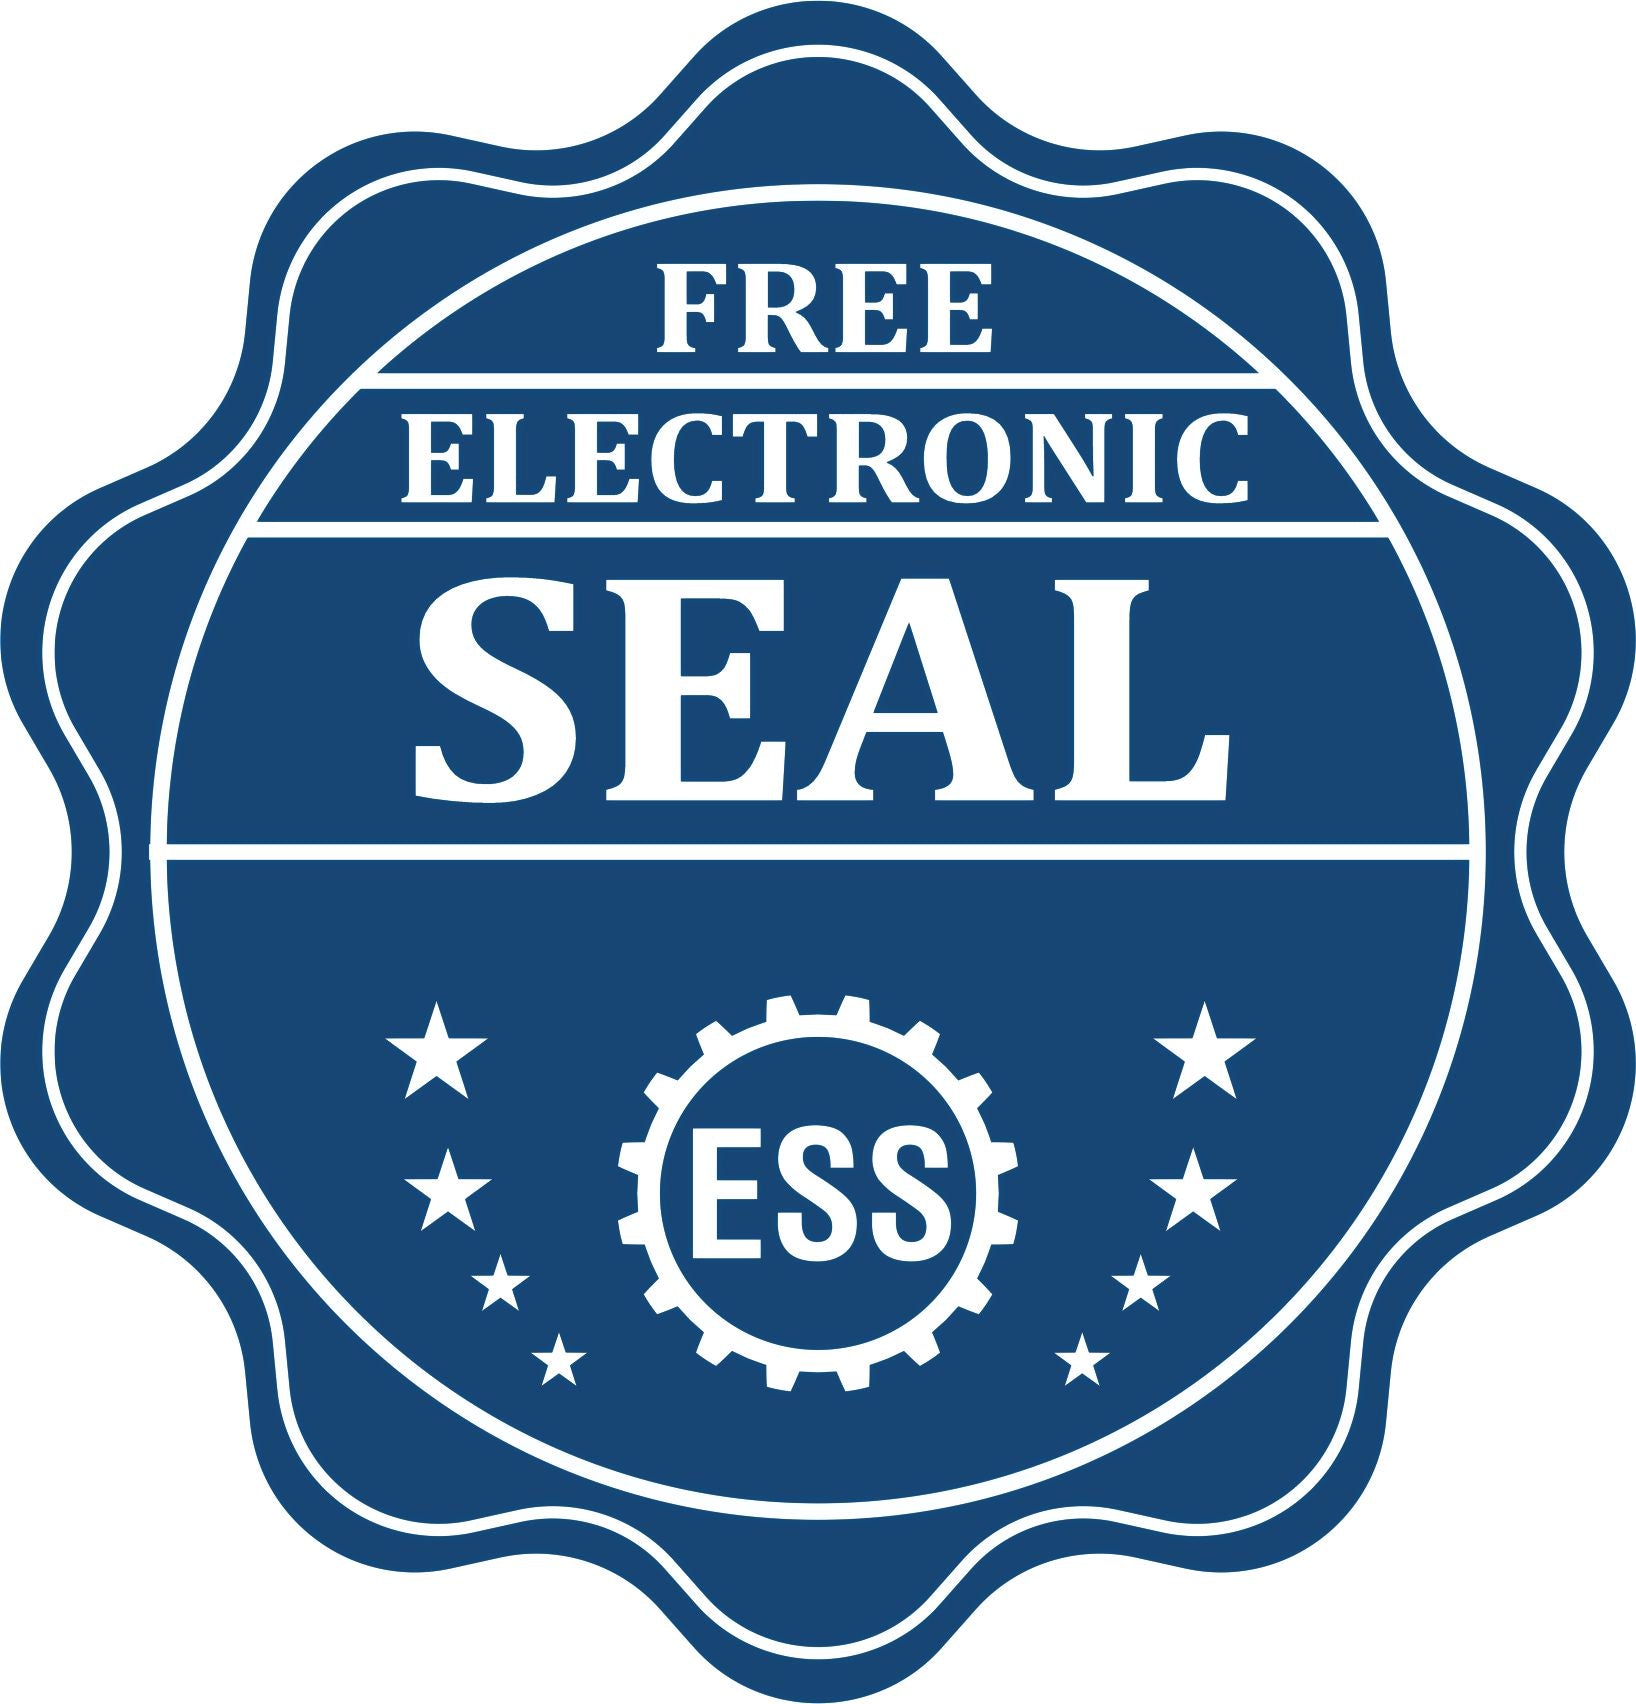 A badge showing a free electronic seal for the Slim Pre-Inked Rectangular Notary Stamp for North Dakota with stars and the ESS gear on the emblem.